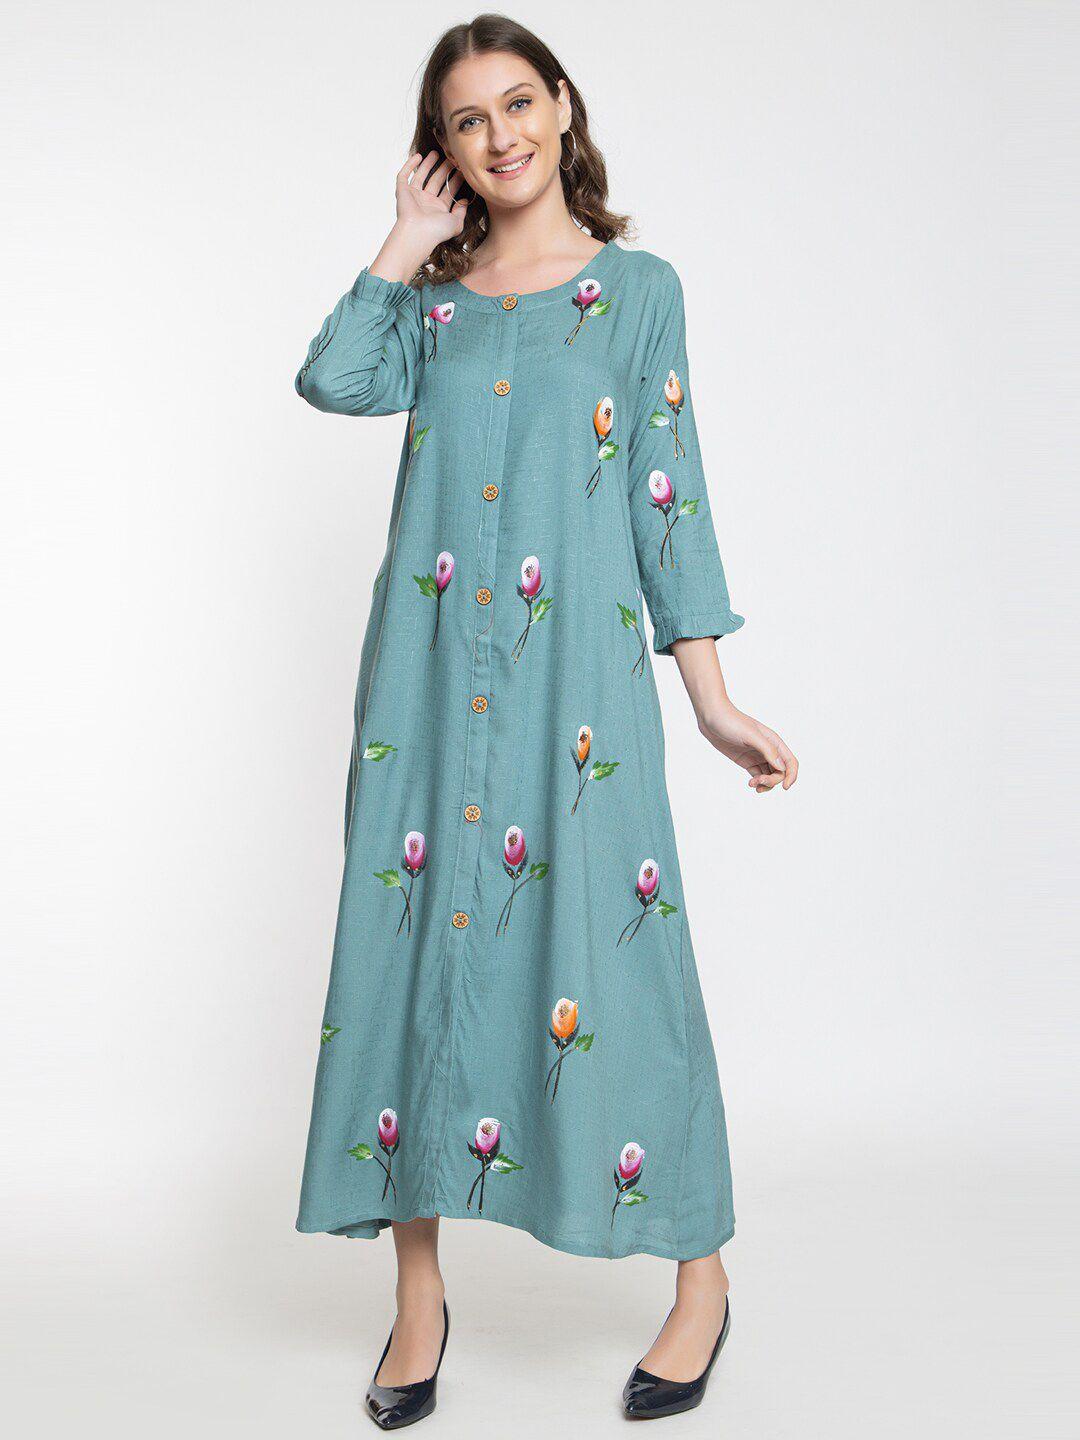 elthia floral printed round neck bell sleeves a-line dress